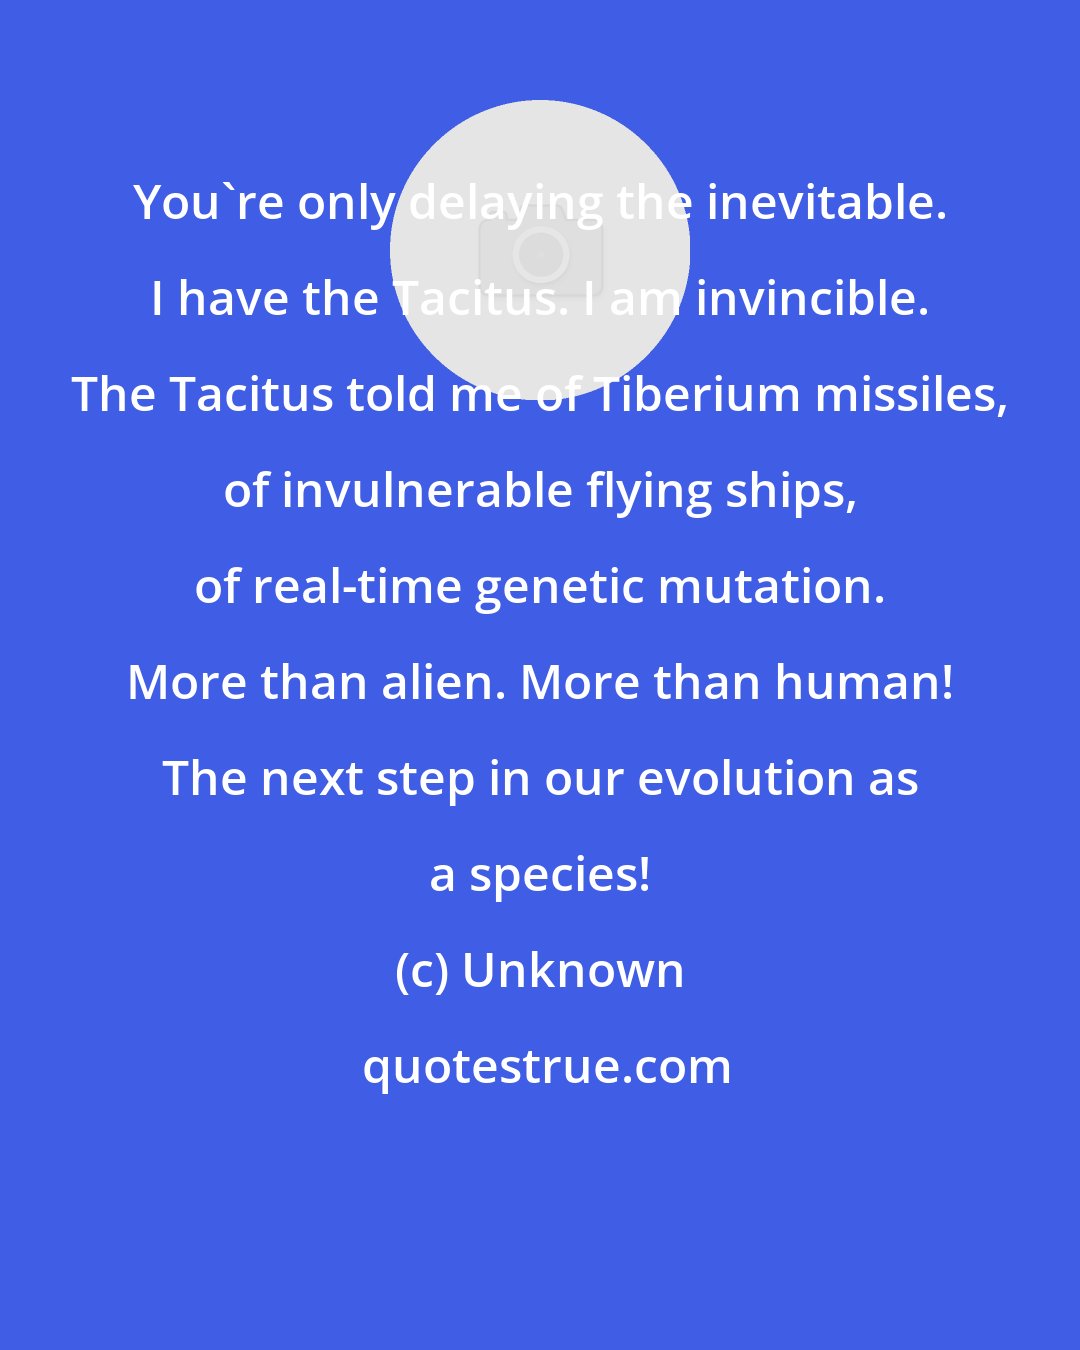 Unknown: You're only delaying the inevitable. I have the Tacitus. I am invincible. The Tacitus told me of Tiberium missiles, of invulnerable flying ships, of real-time genetic mutation. More than alien. More than human! The next step in our evolution as a species!